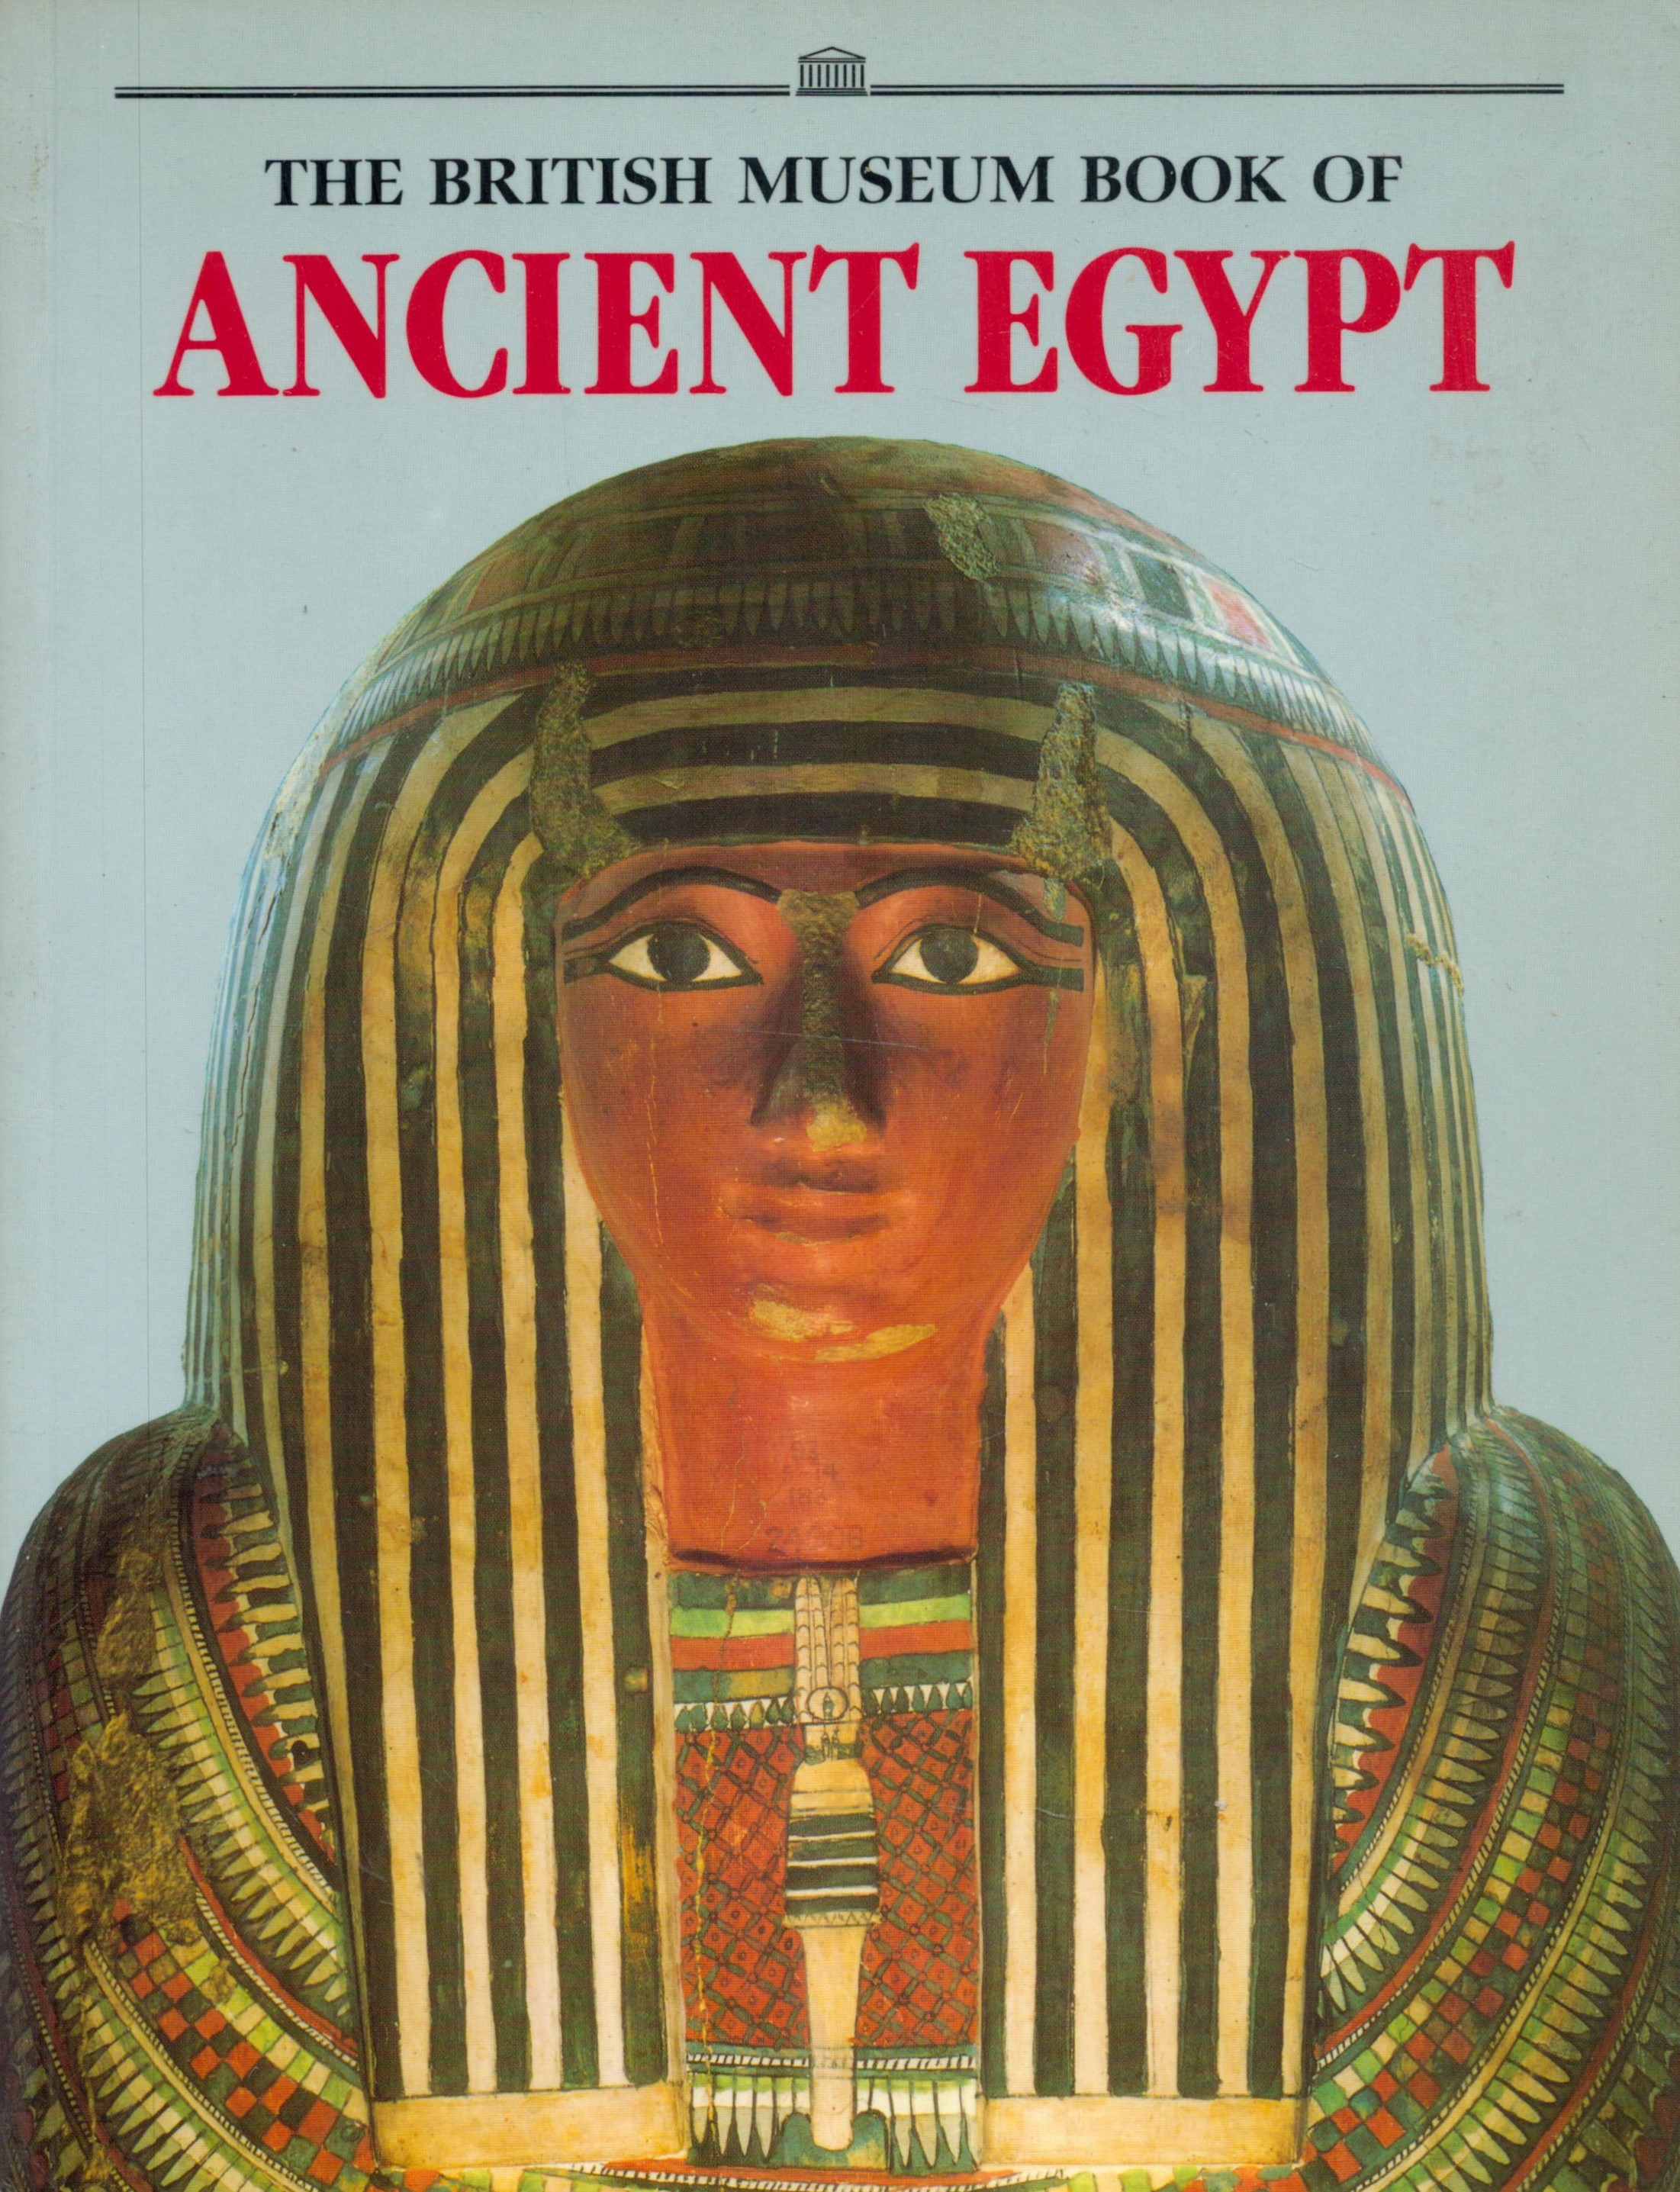 The British Museum Book Of Ancient Egypt Edited by Stephen Quirke and Jeffrey Spencer 1992 First